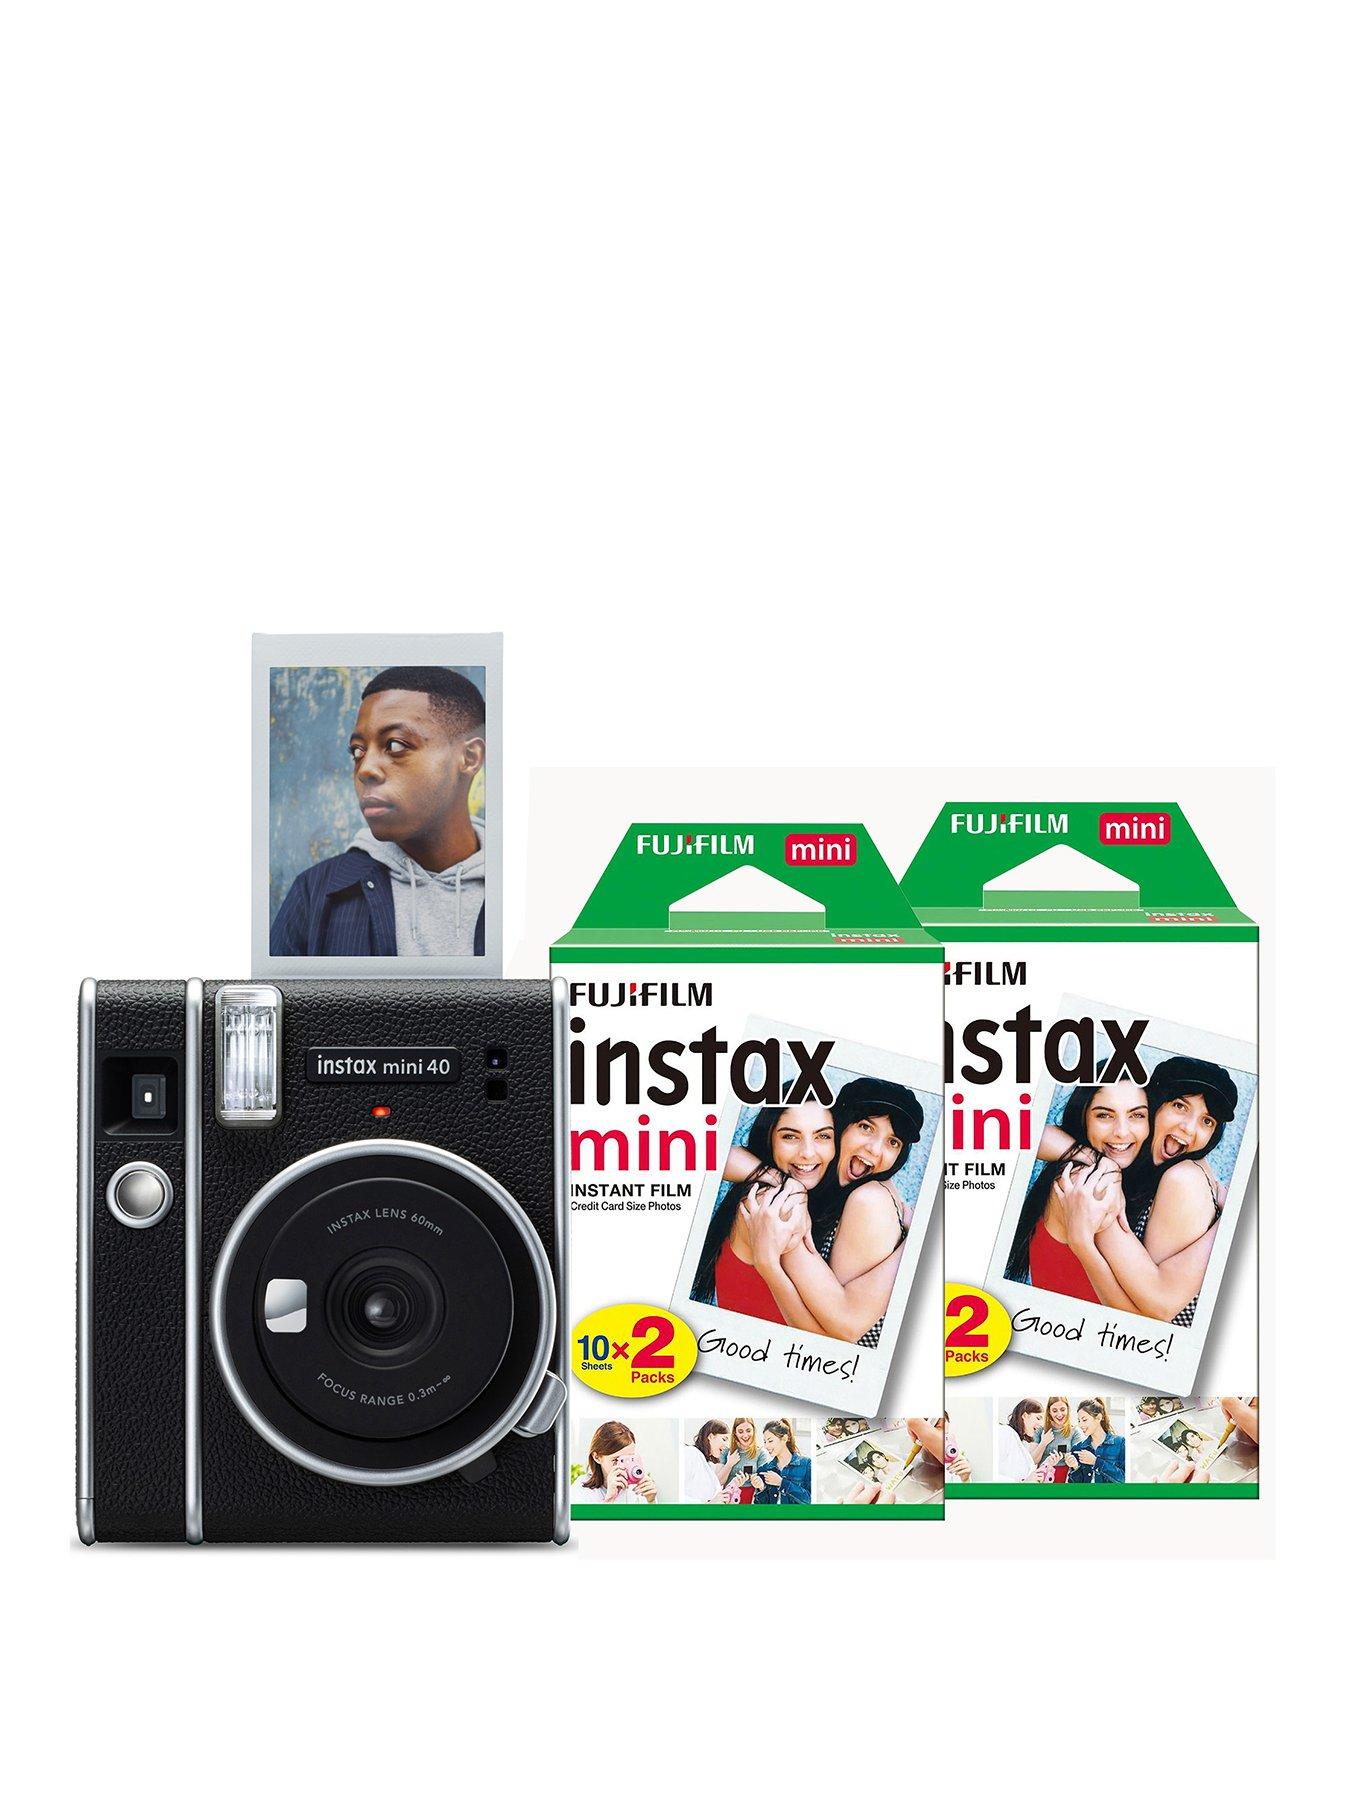 instax mini 40 instant film camera, easy use with automatic